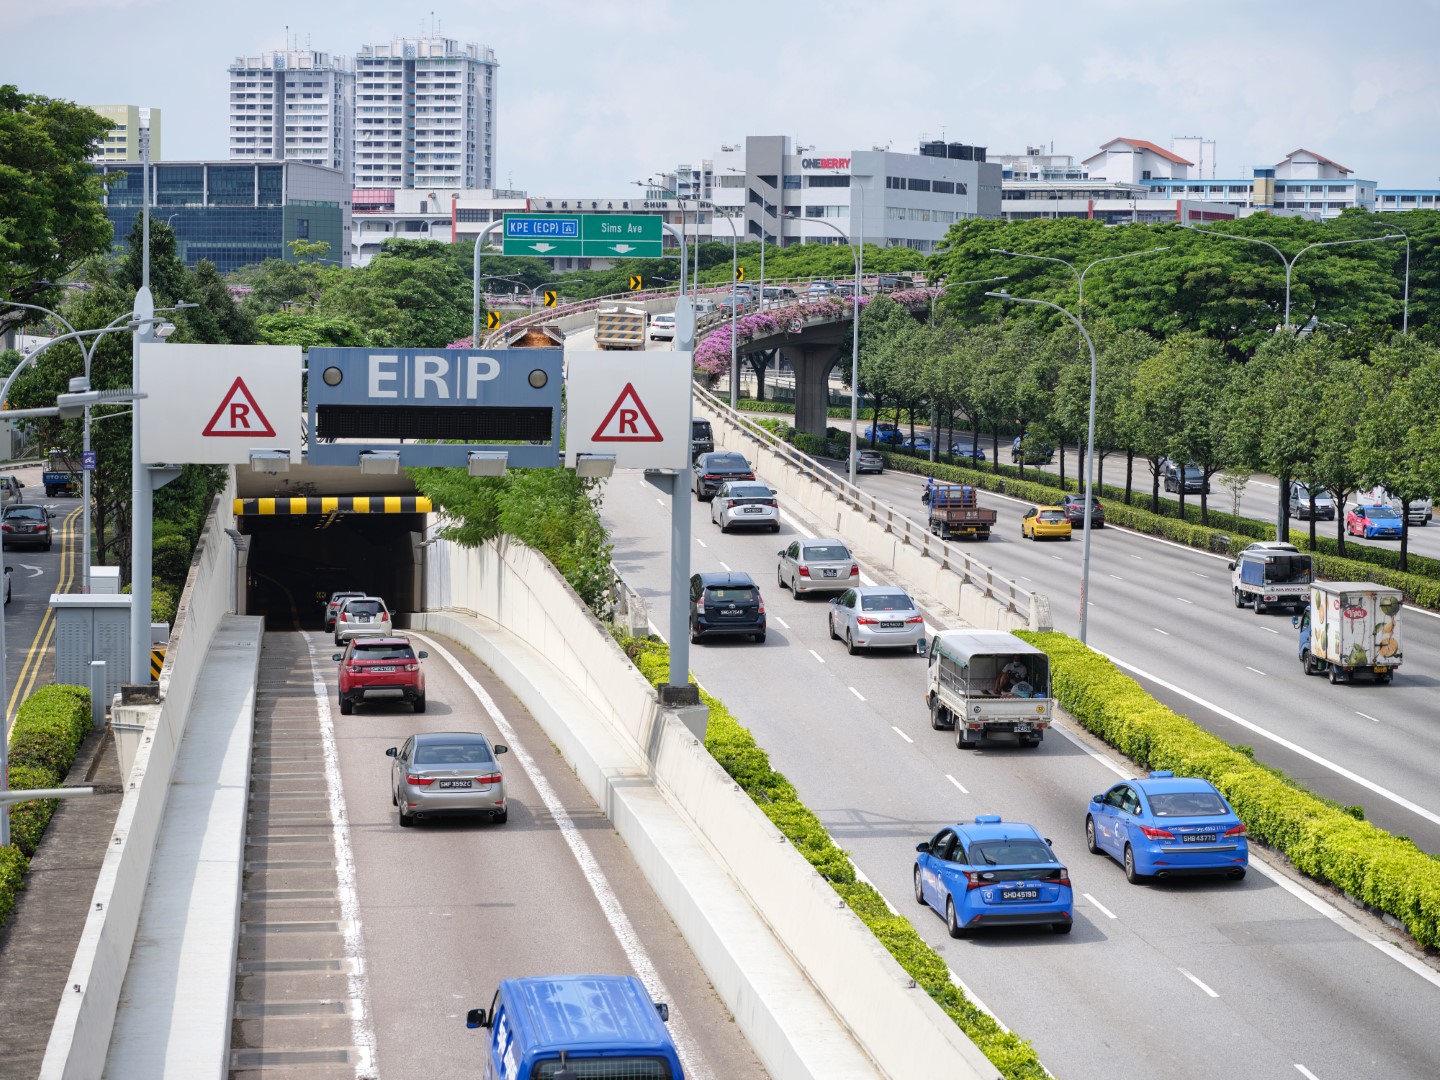 At the time of its completion, the Kallang-Paya Lebar Expressway was one of Southeast Asia's longest underground road tunnel